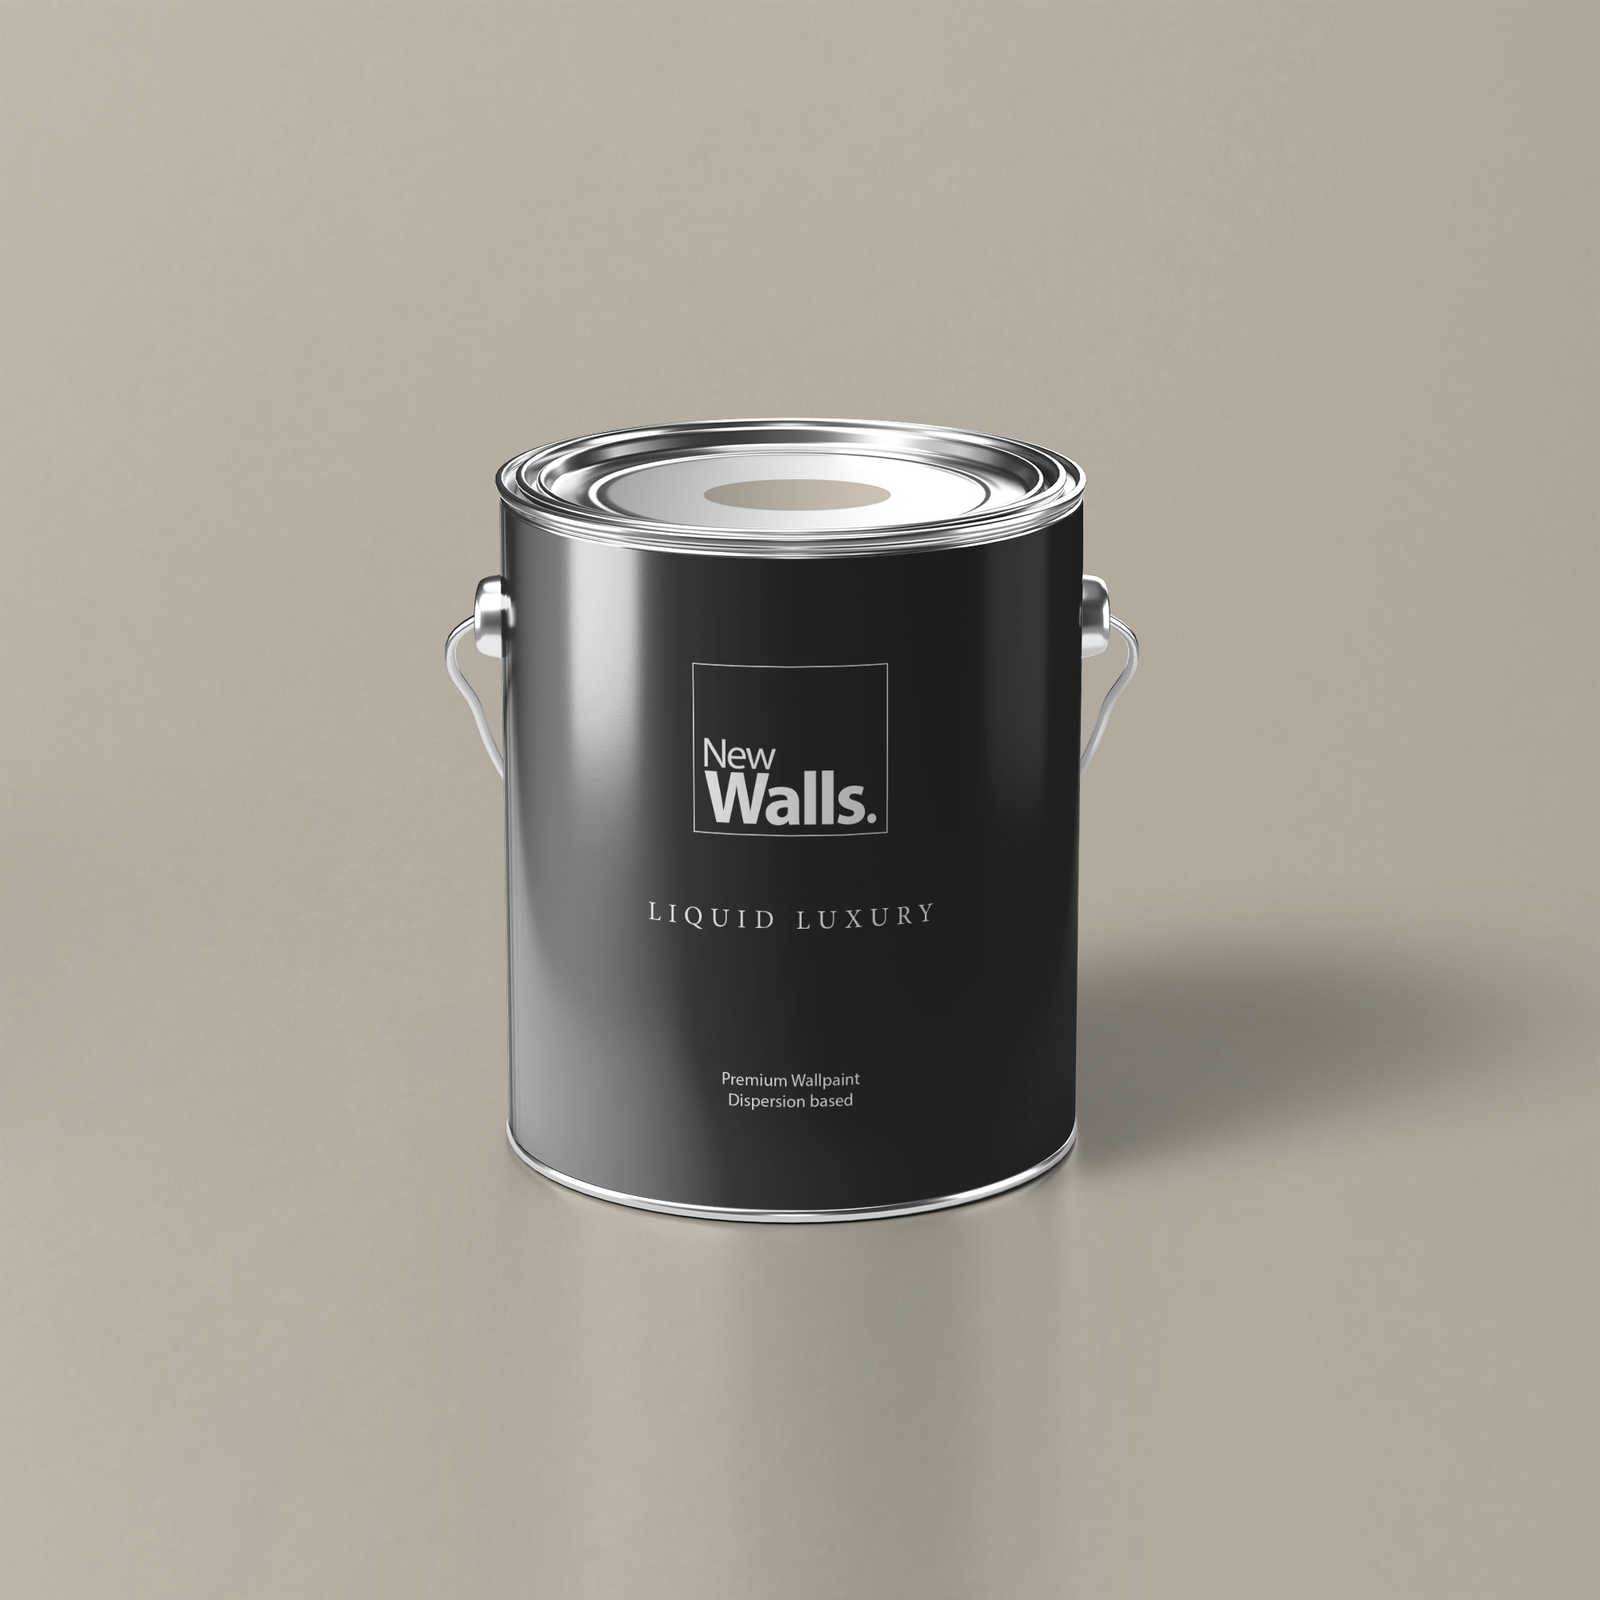 Premium Wall Paint cosy taupe »Talented calm taupe« NW700 – 5 litre
